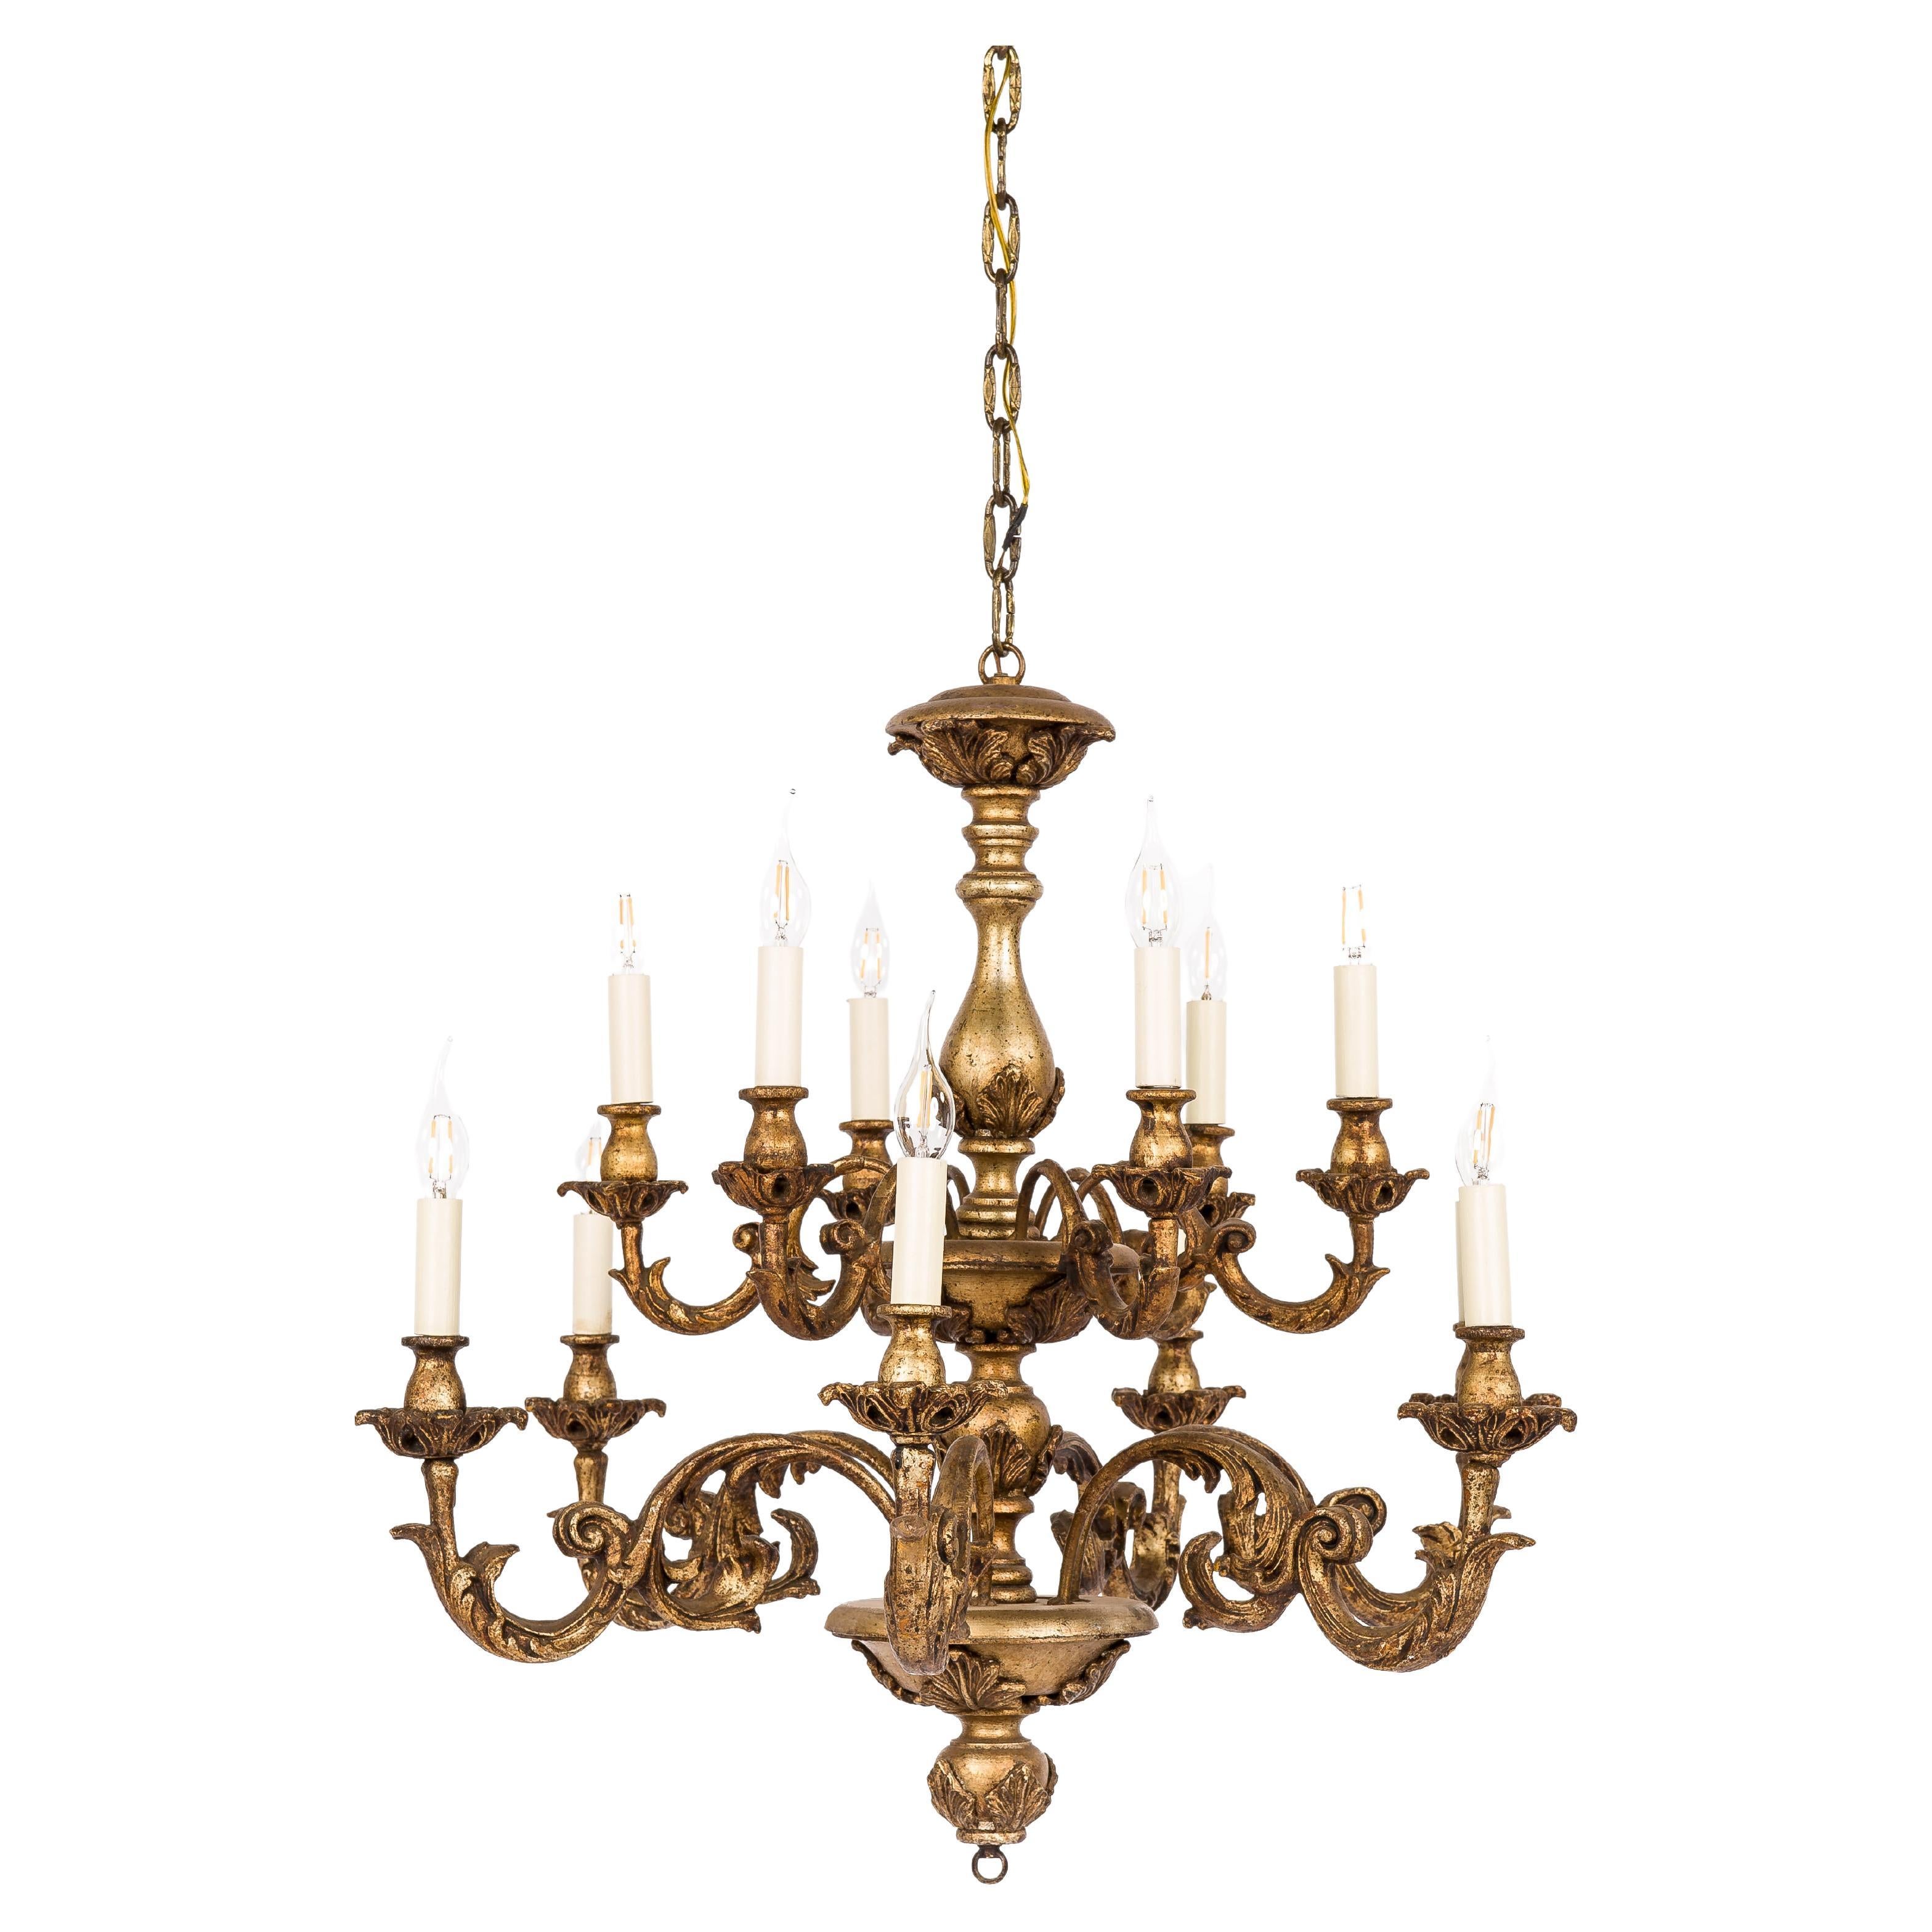 20th Century Italian Baroque Giltwood Two-Tier 12-Arm Florentine Chandelier For Sale